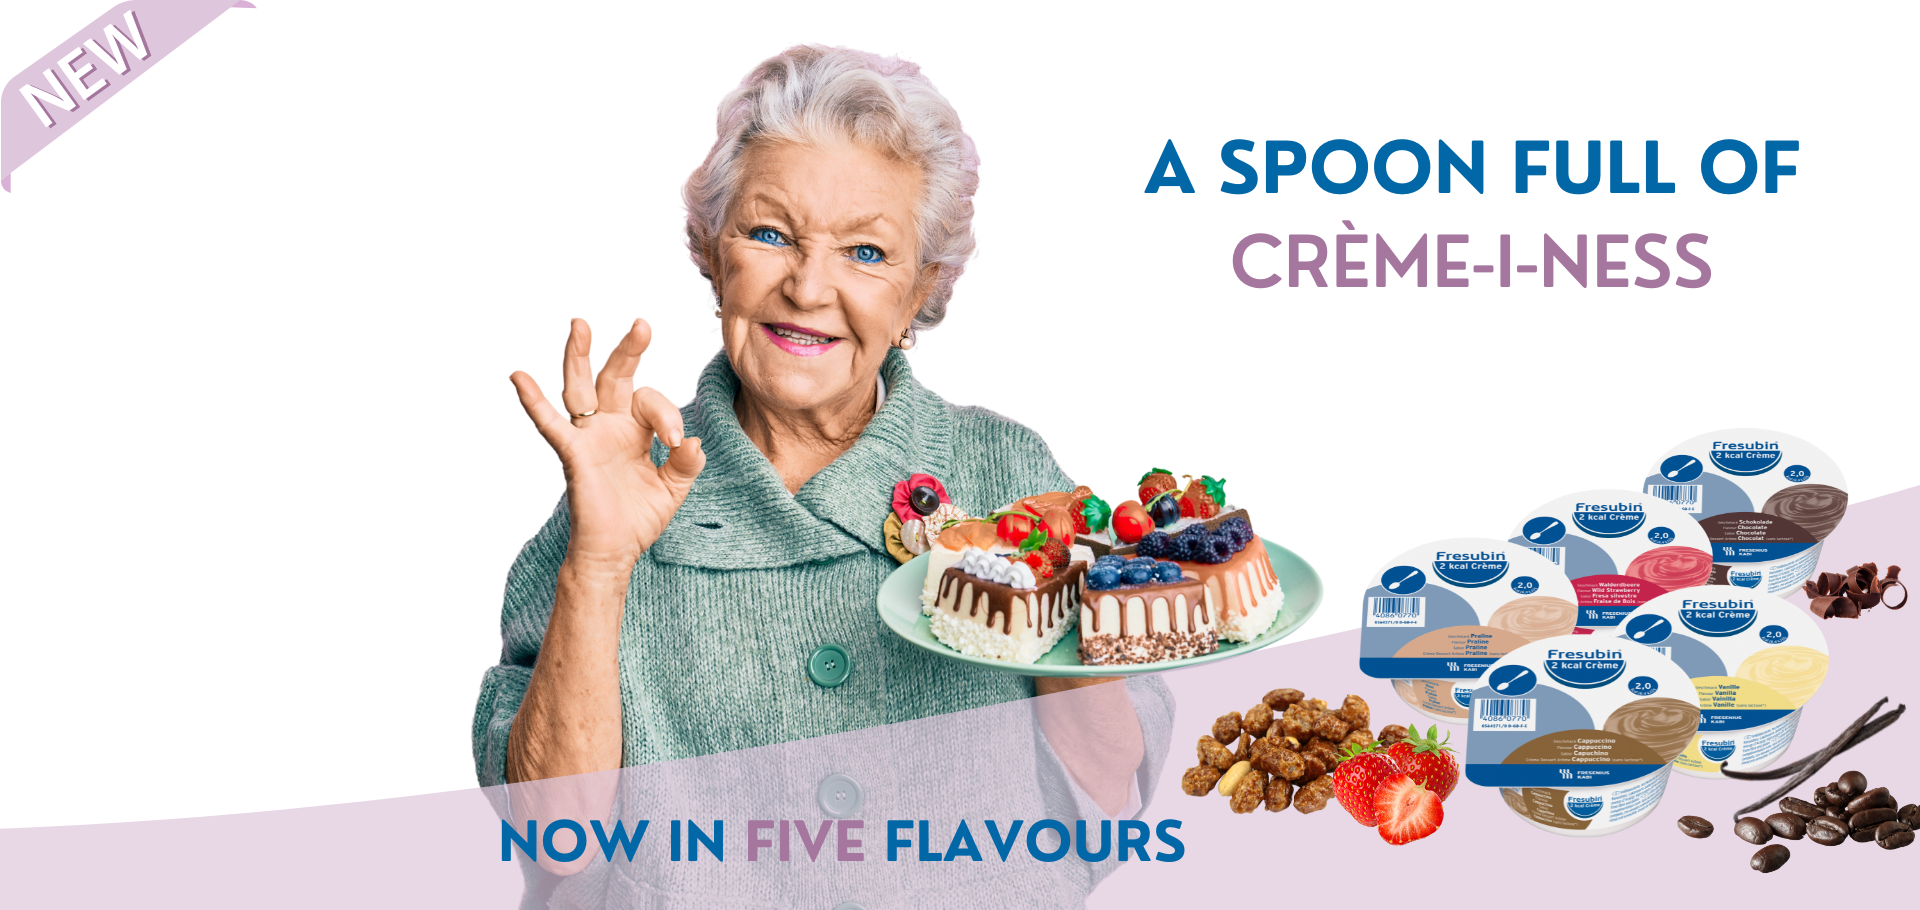 Fresubin 2 Kcal Creme New Flavours